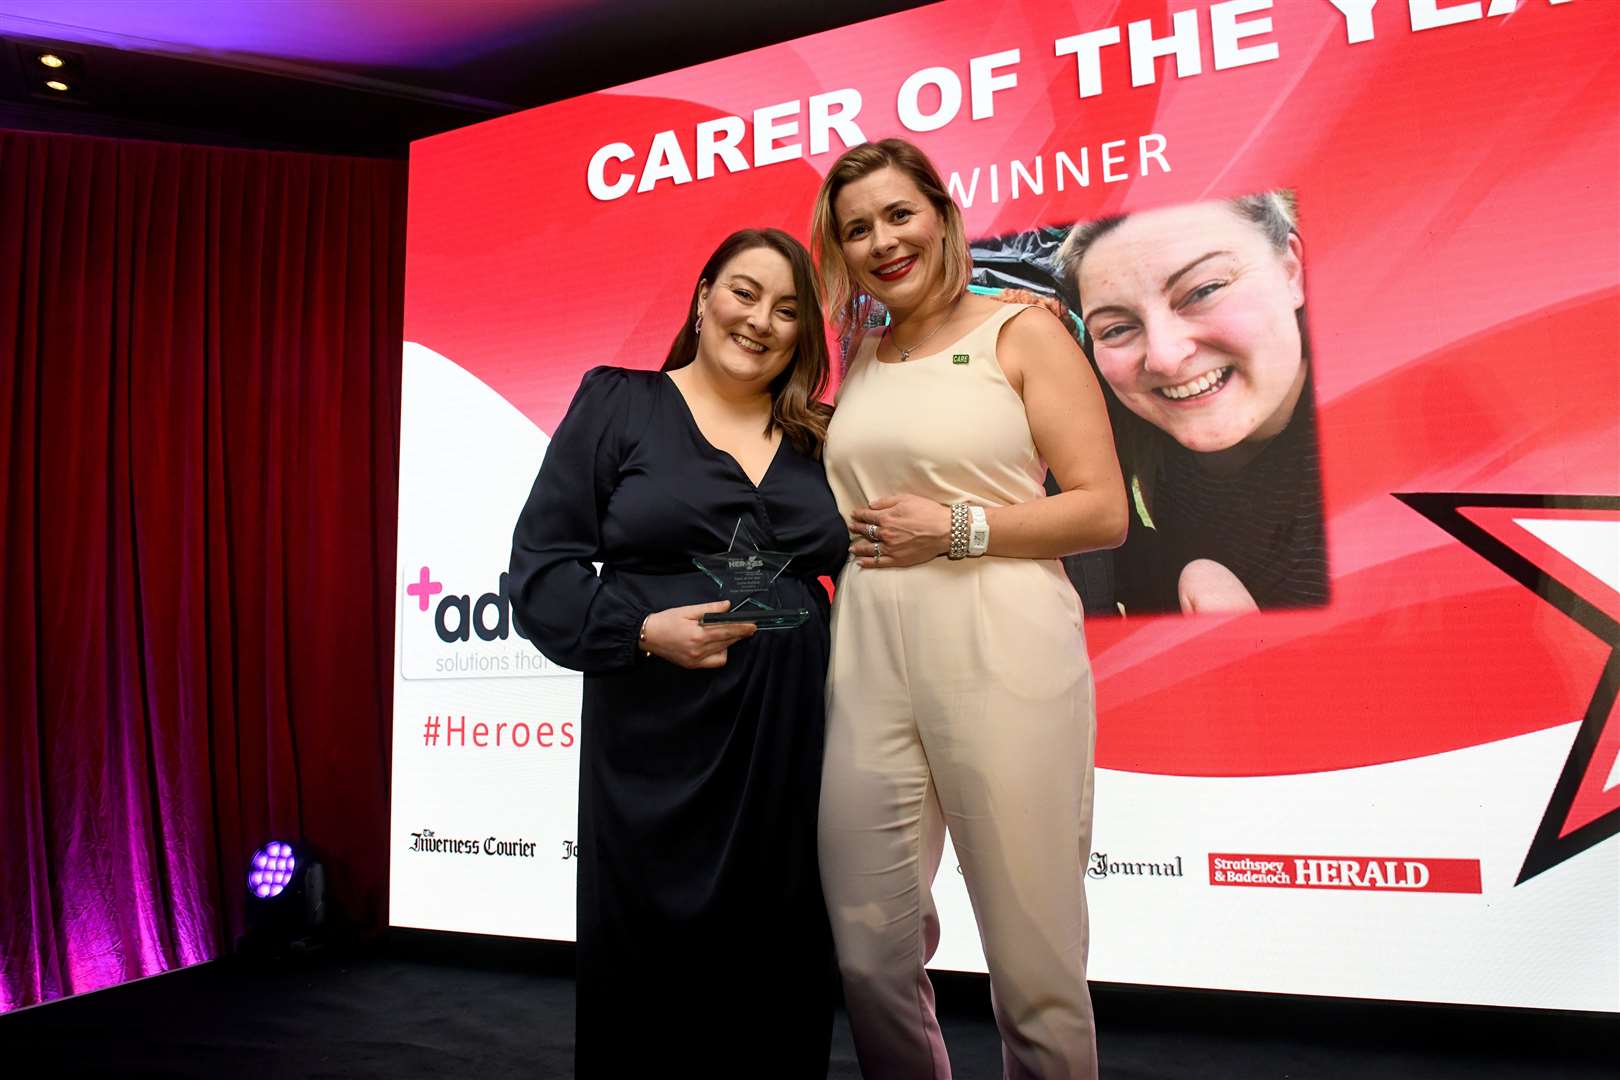 Louise Borland won the Carer of the Year Award. Award presented by Abbie McCahill of Adder Business Solutions. Picture: James Mackenzie.